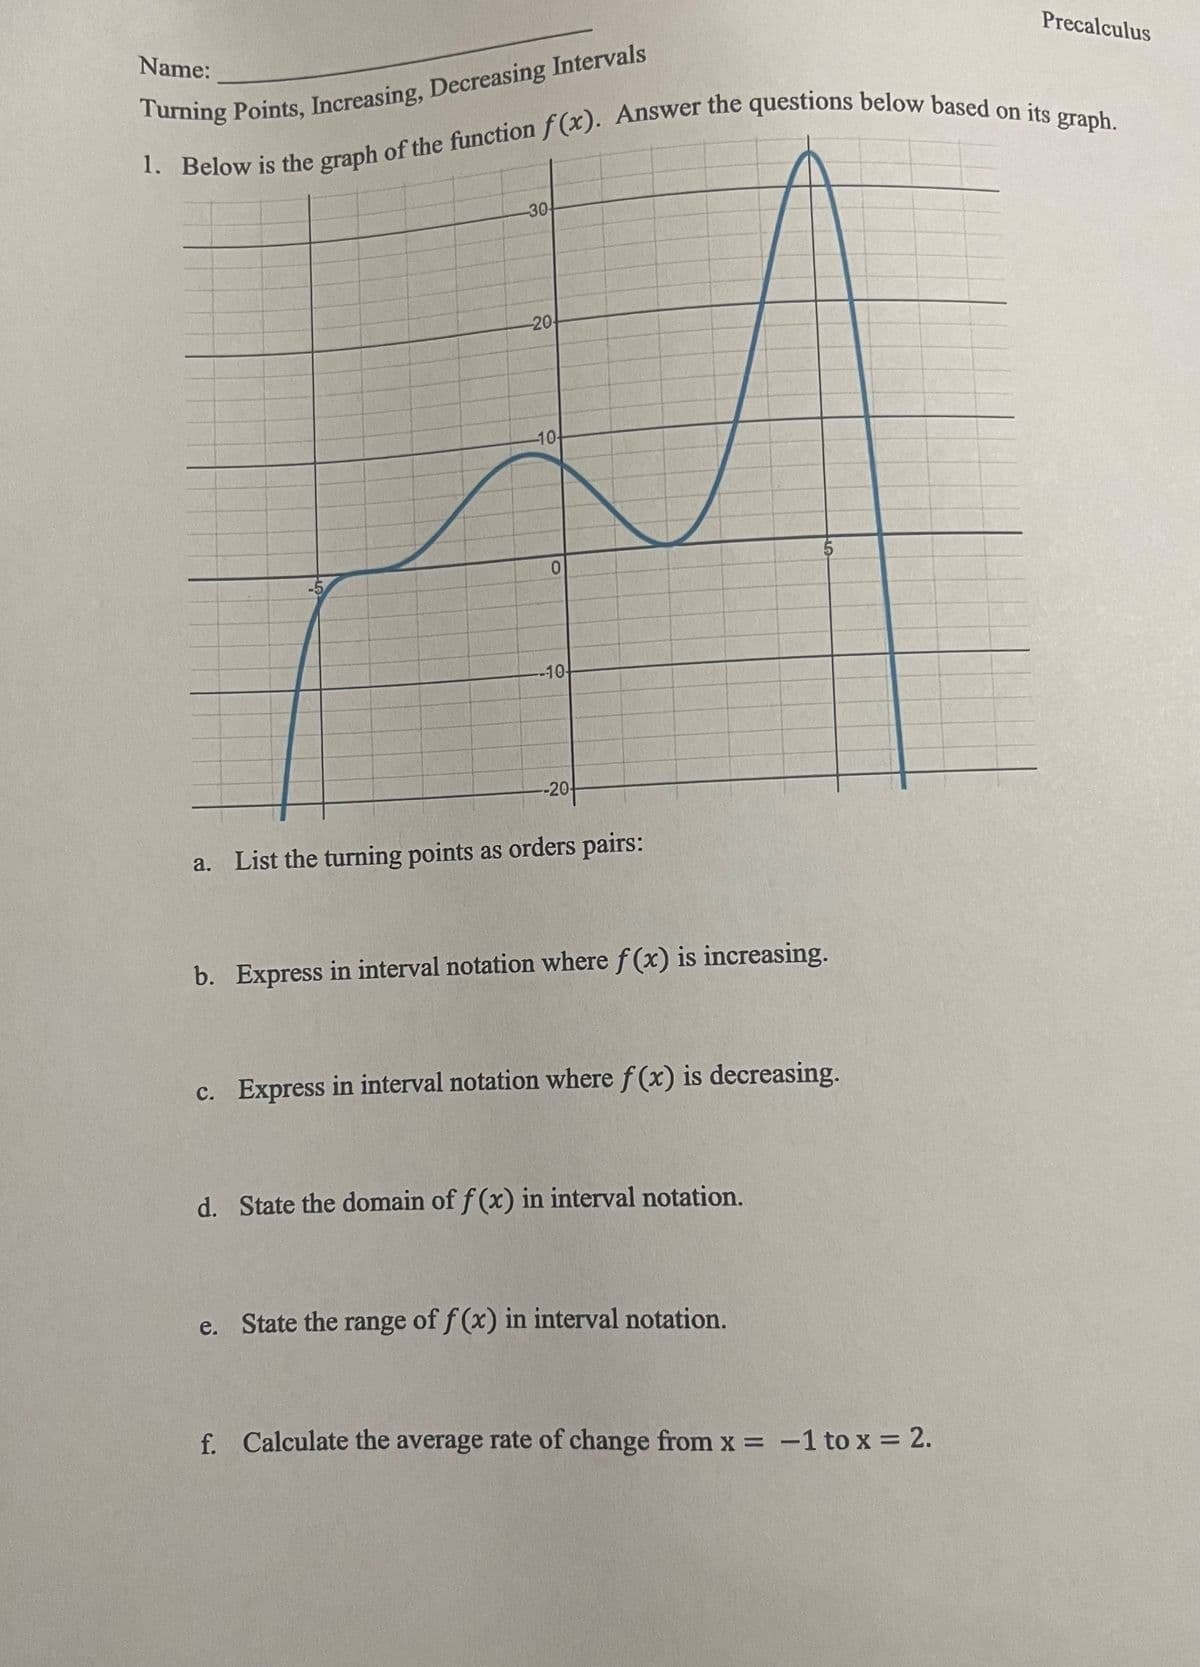 Name:
Turning Points, Increasing, Decreasing Intervals
1. Below is the graph of the function f(x). Answer the questions below based on its graph.
-30
-20
-10
2
0
-10-
-20-
a. List the turning points as orders pairs:
b. Express in interval notation where f(x) is increasing.
ET
c. Express in interval notation where f(x) is decreasing.
d. State the domain of f(x) in interval notation.
e. State the range of f(x) in interval notation.
Precalculus
f. Calculate the average rate of change from x = -1 to x = 2.